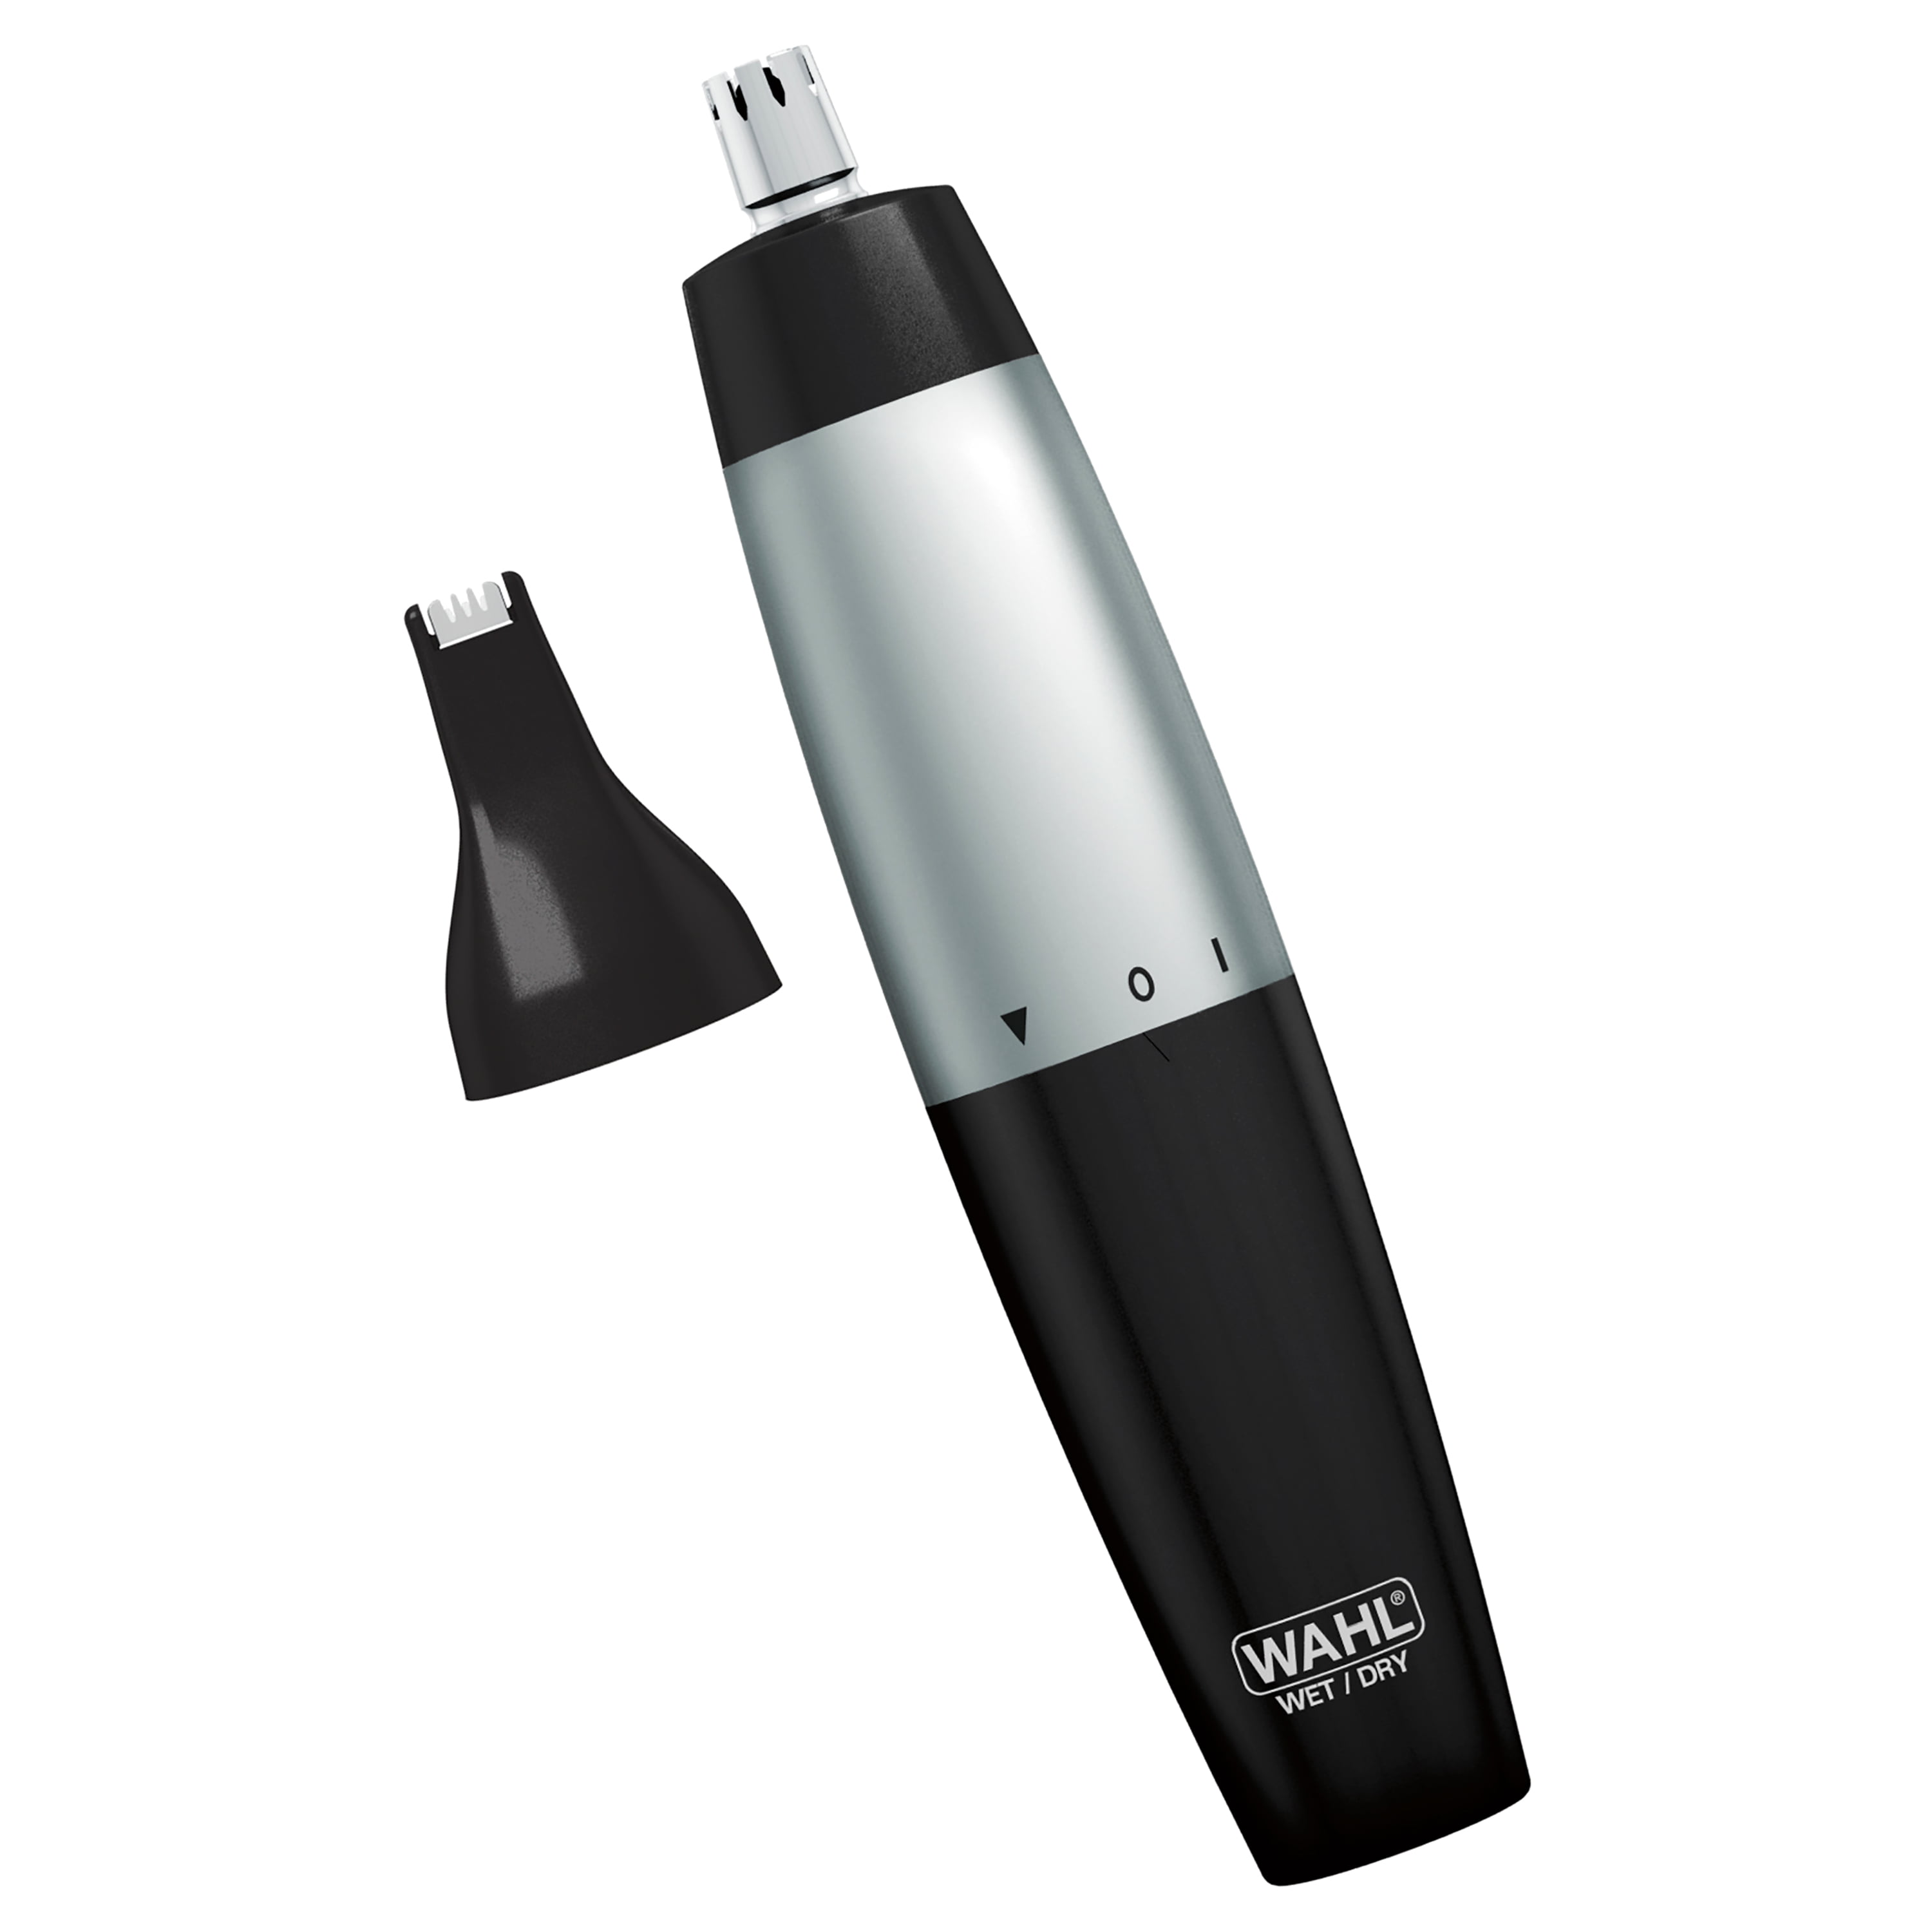 wahl wet dry trimmer manual